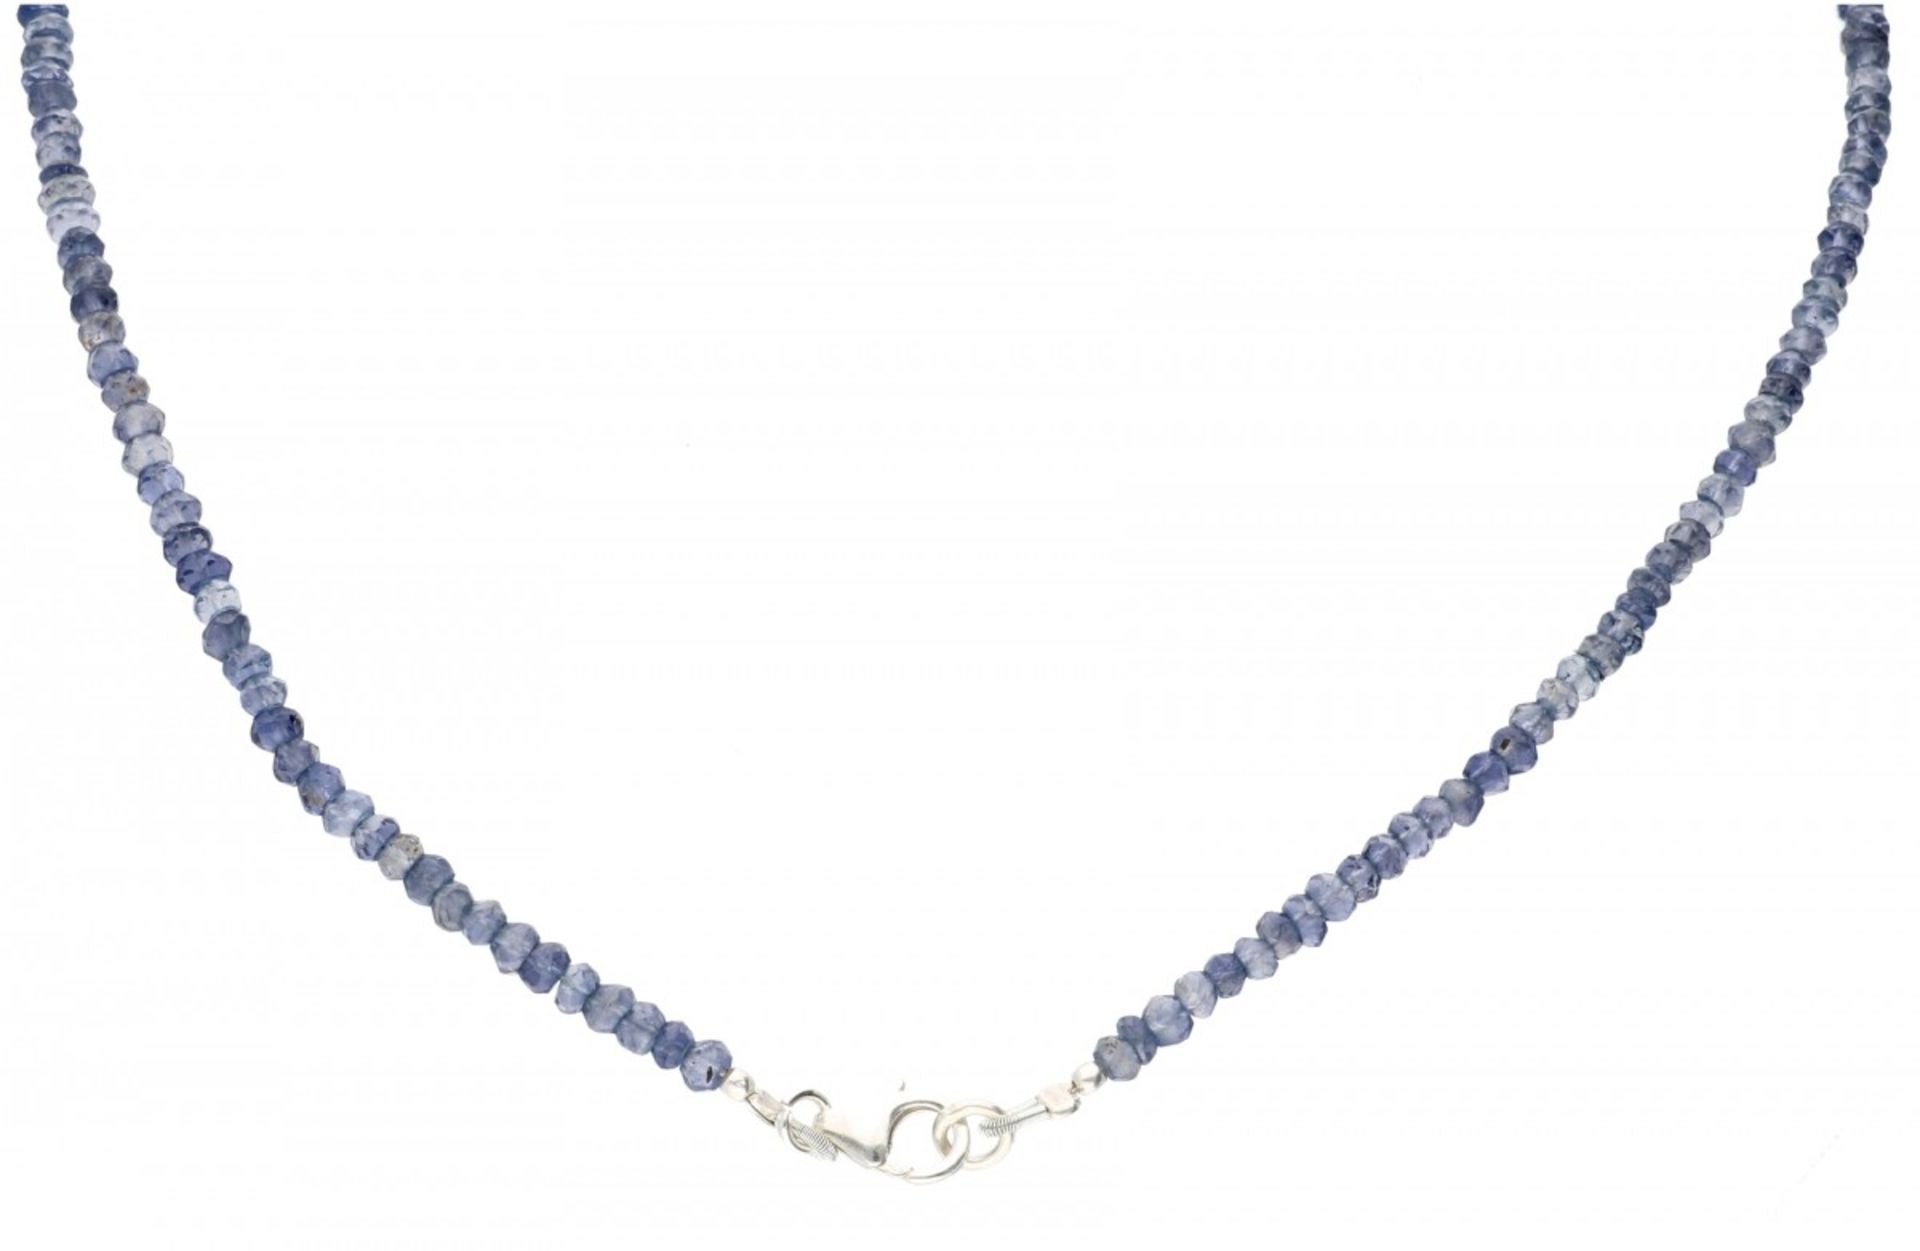 Single strand necklace with silver closure, completely set with natural iolite - 925/1000. - Image 2 of 2